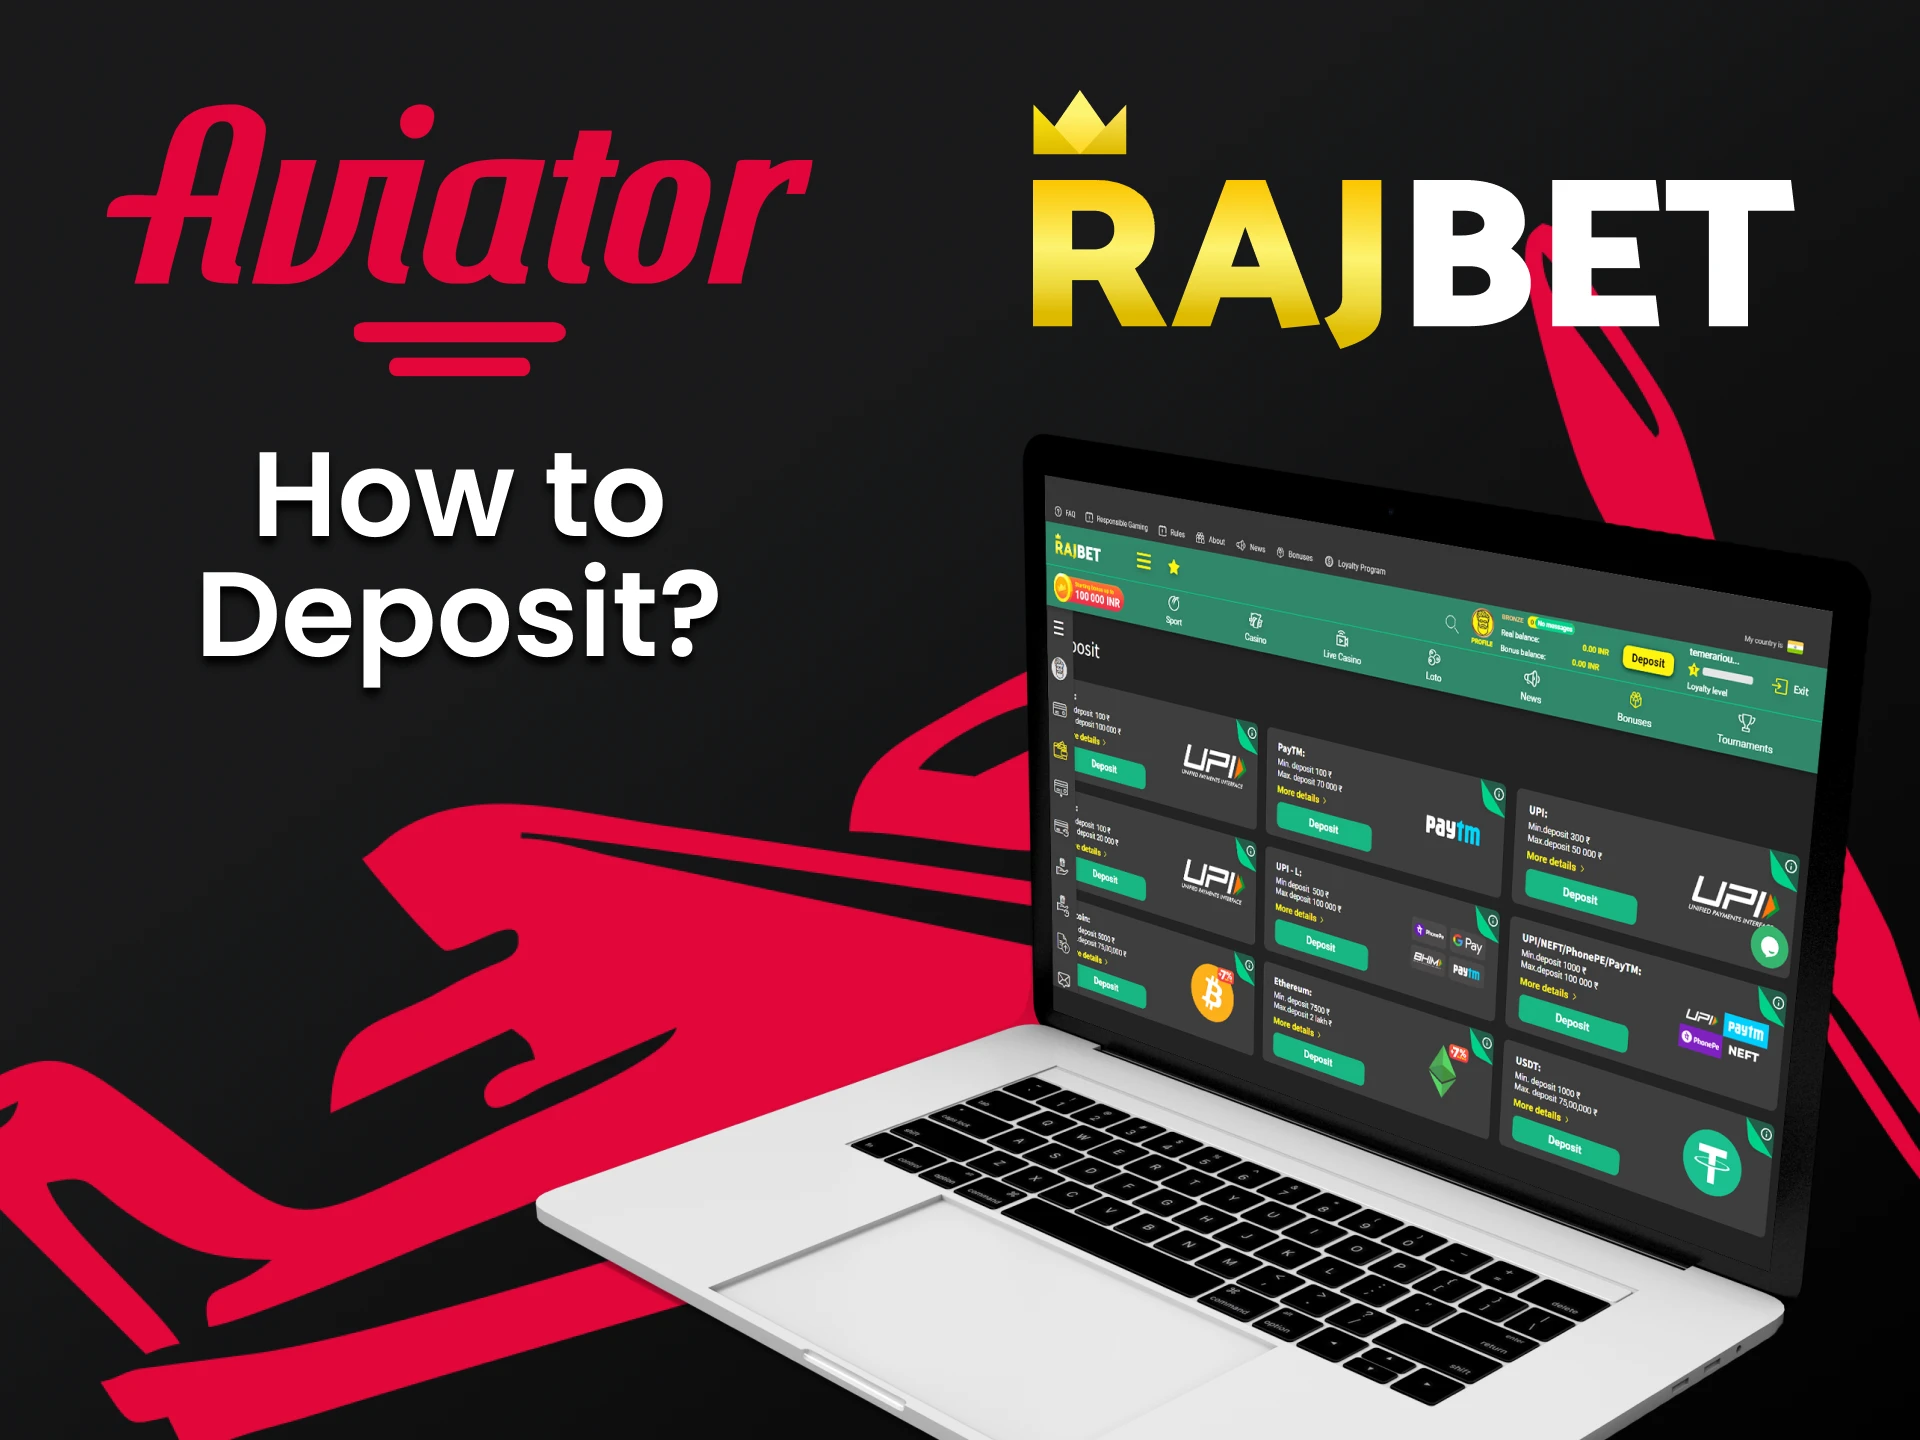 Replenish your deposit with a convenient way from Rajbet.